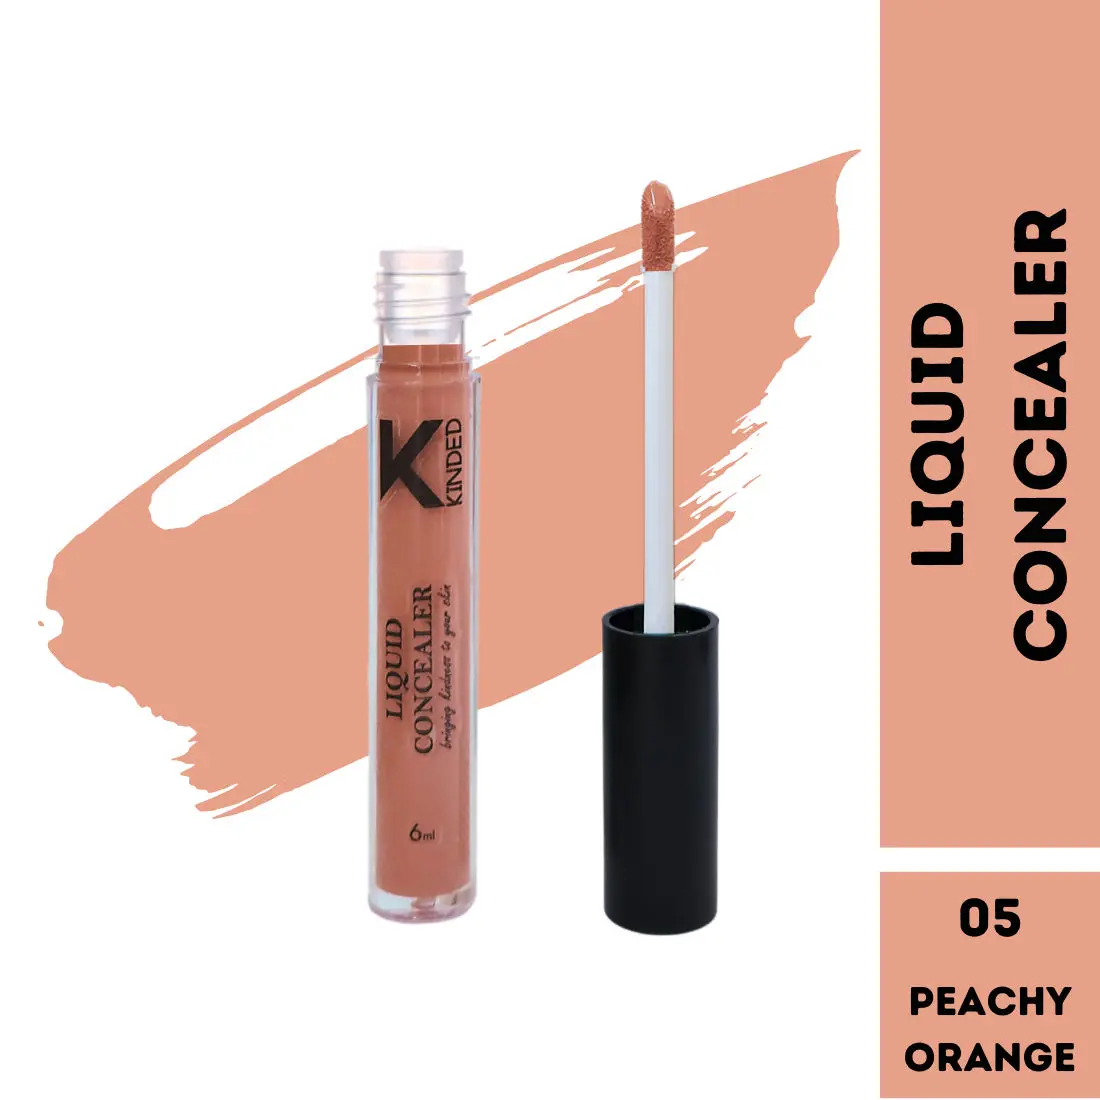 KINDED Liquid Concealer for Face Makeup Full Coverage Colour Corrector Contour Waterproof HD Pro Master Series for Dry & Oily Skin Acne Dark Circles Dark Spots (Creamy Matte, Peachy Orange, 6 ml)